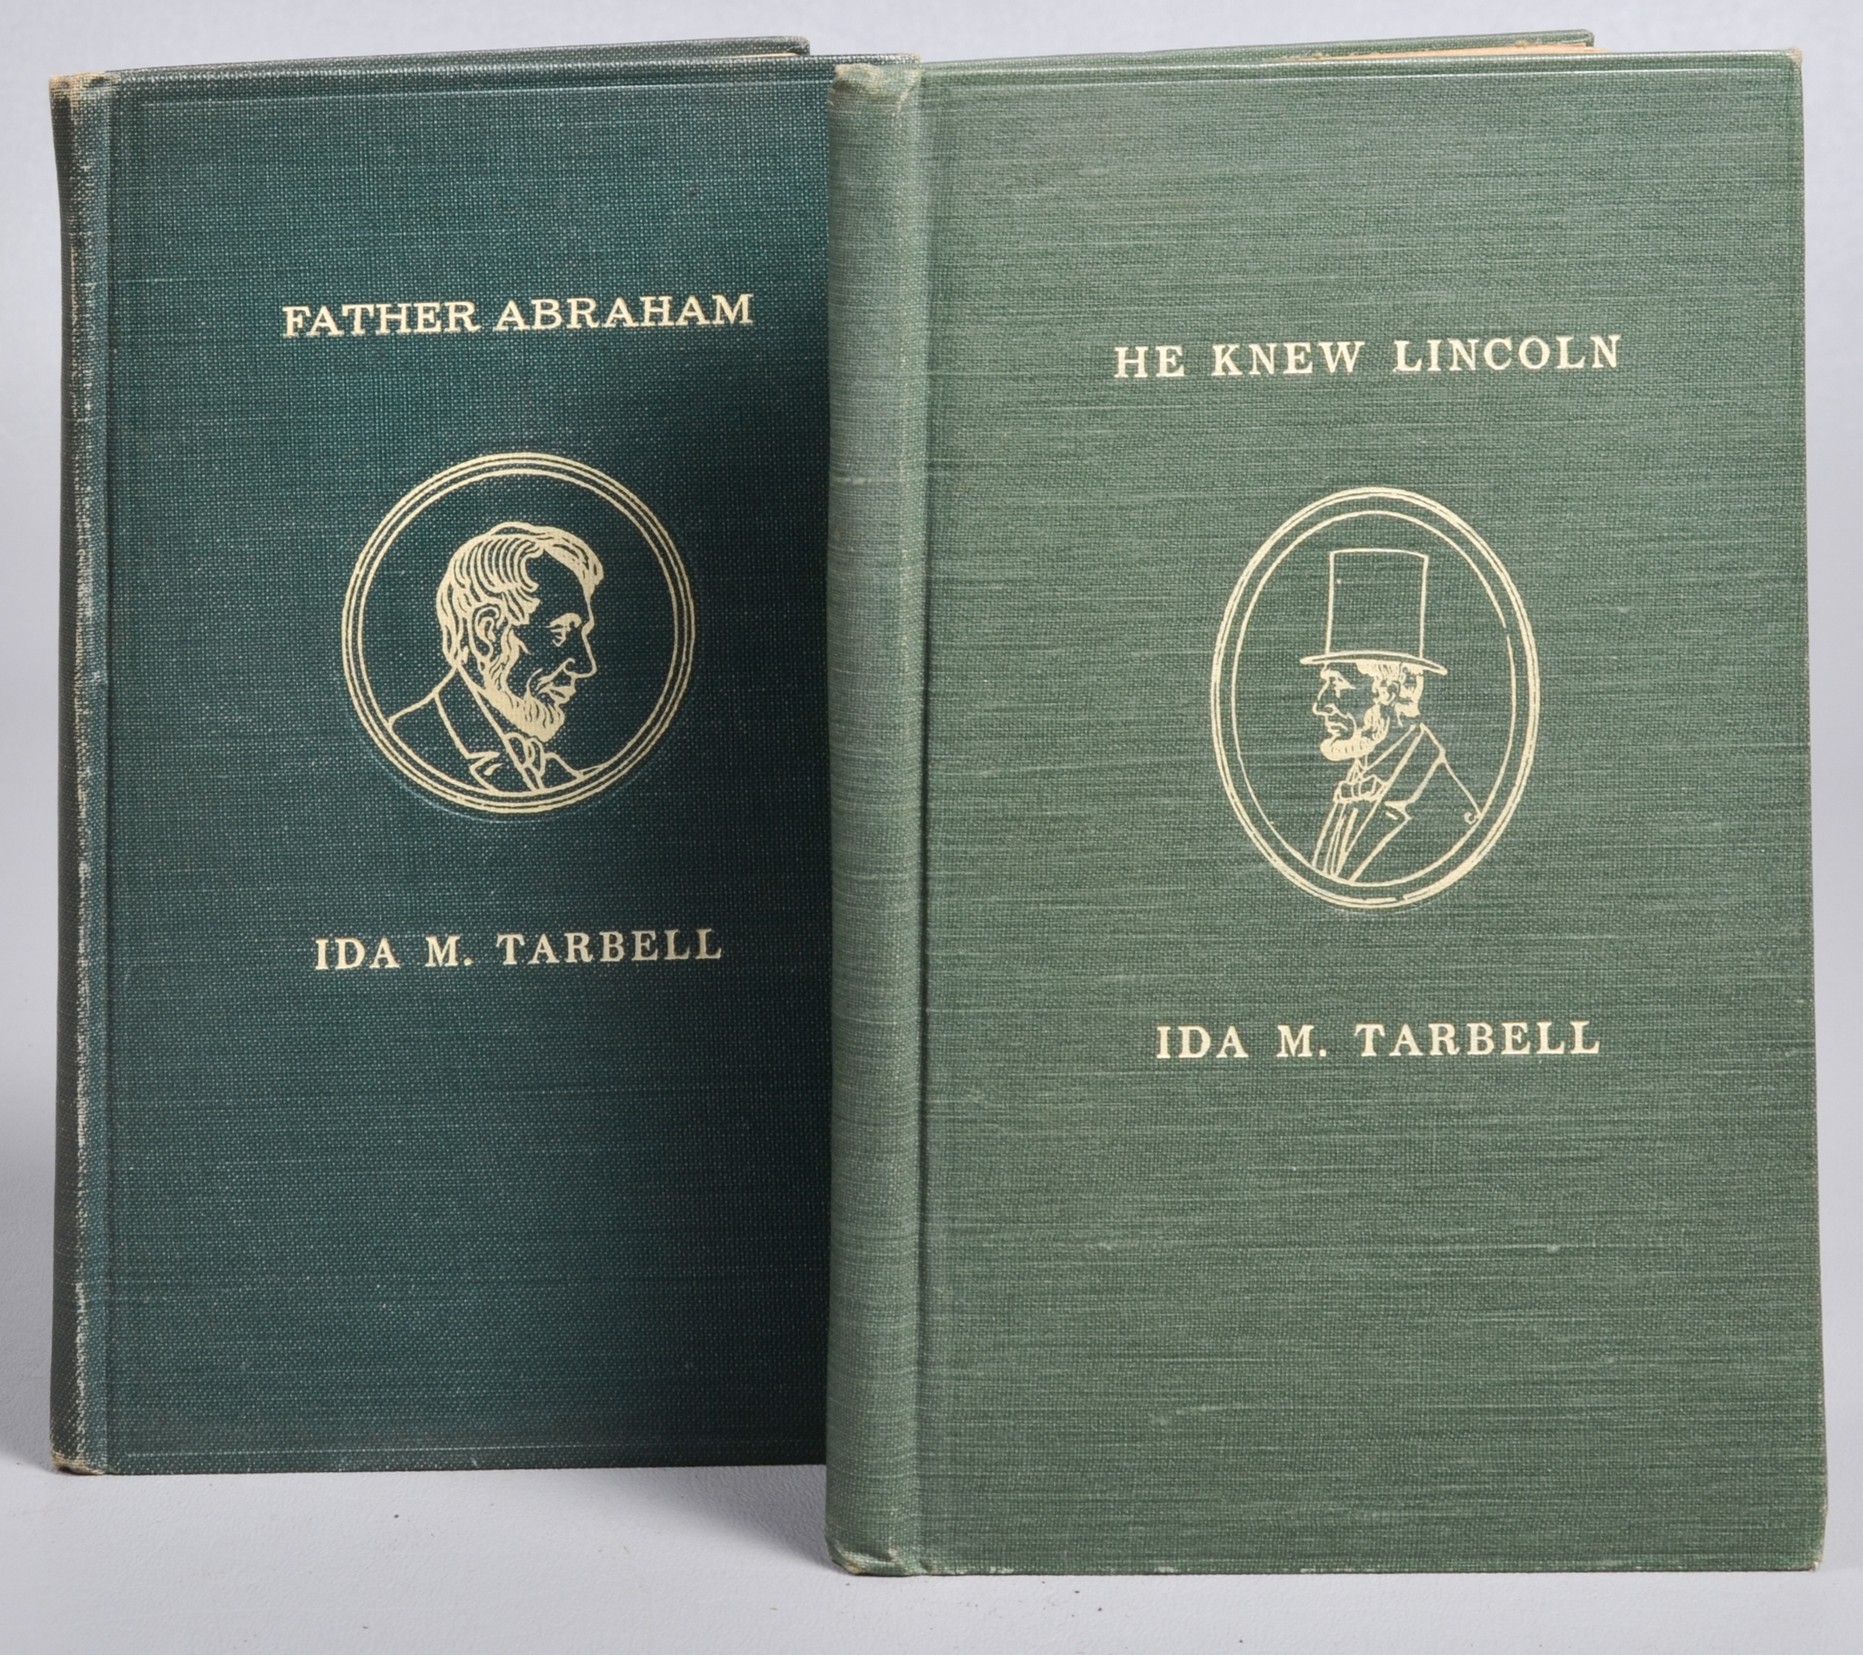 Father Abraham (New York, 1909), and